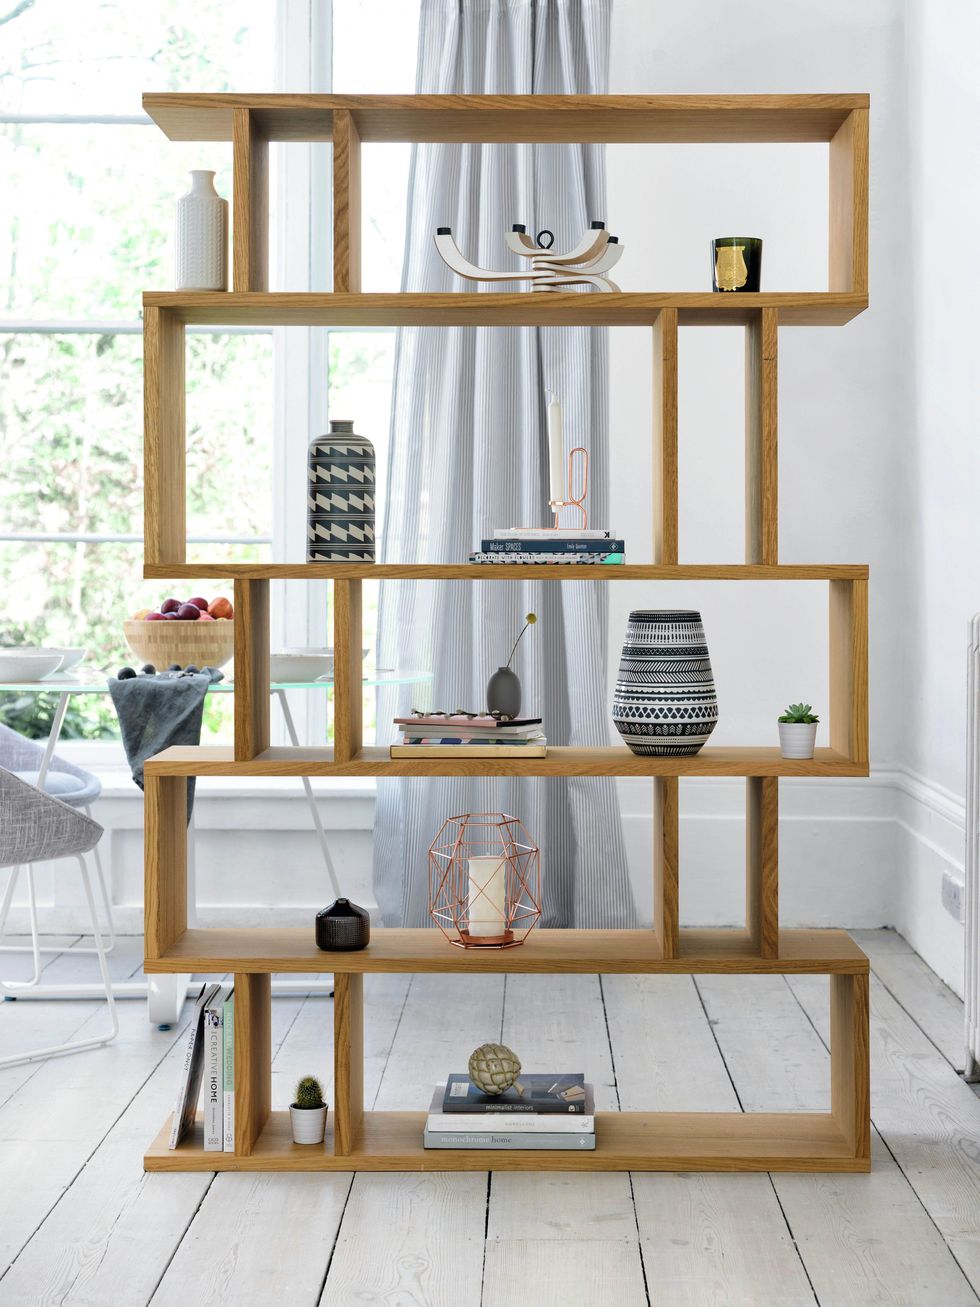 <p>Finished with rich, lightly oiled oak veneers, this linear design is versatile, practical and beautiful to look at.</p><p><strong data-redactor-tag="strong">Content by Conran Elmari Tall Shelving, £599, Furniture Village <a href="https://www.furniturevillage.co.uk/elmari-tall-shelving/ZFRSP000000000021249.html" class="body-btn-link" target="_blank">BUY NOW</a></strong></p>